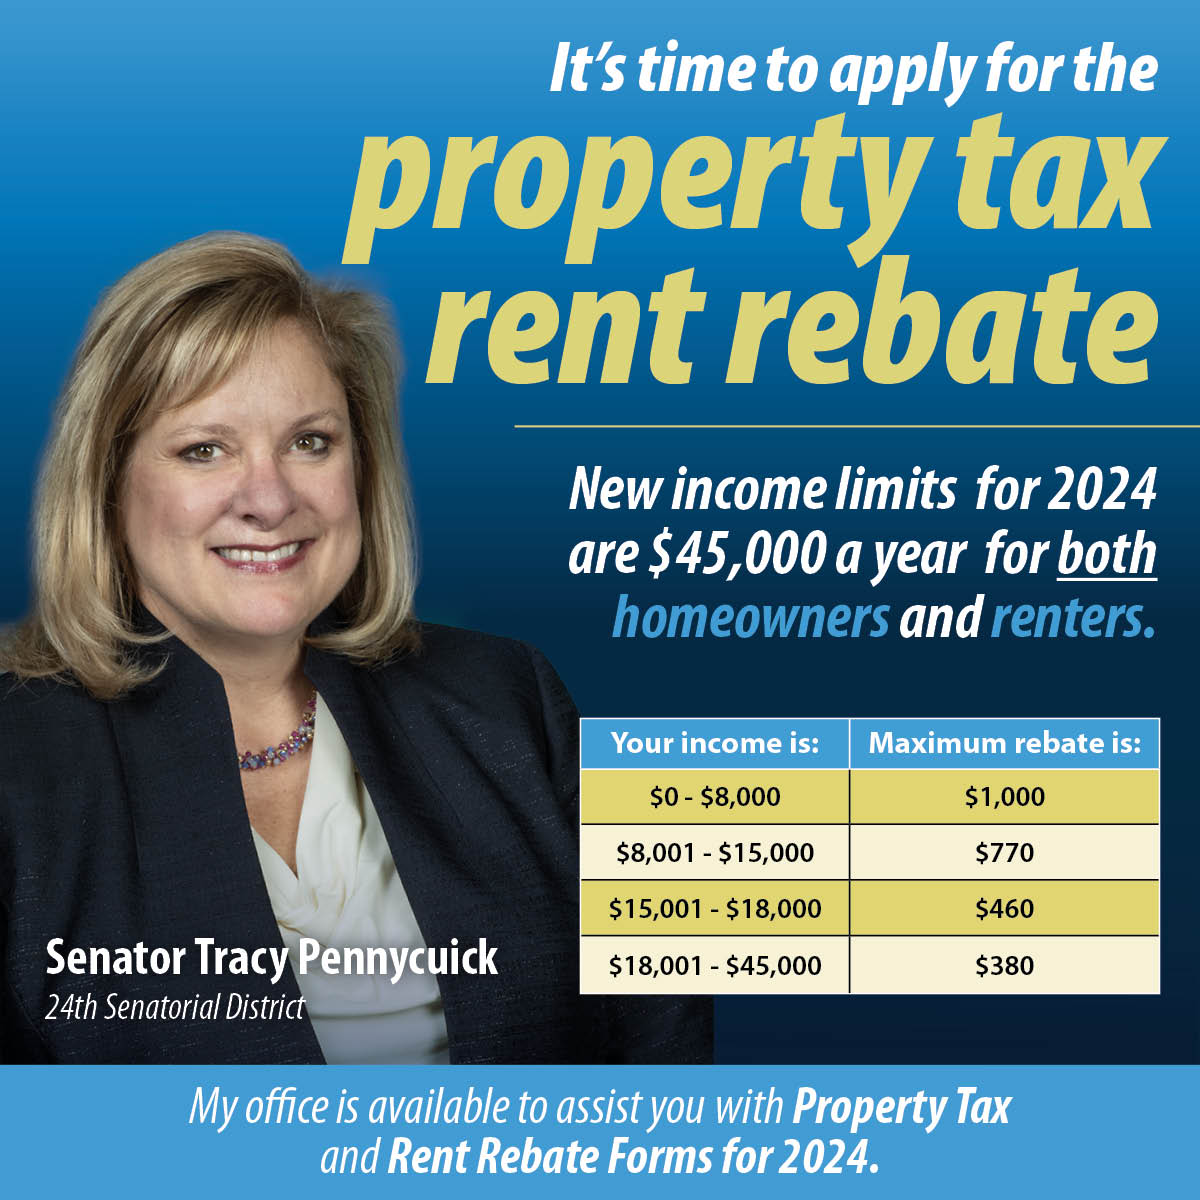 ❗️Attention seniors! I'm hosting events throughout March to help you apply for the state's Property Tax/Rent Rebate Program. Call (215) 541-2388 to schedule an appointment or visit my website for available dates.

Make an appointment here ➡️ senatorpennycuick.com/ptrr-assistanc…